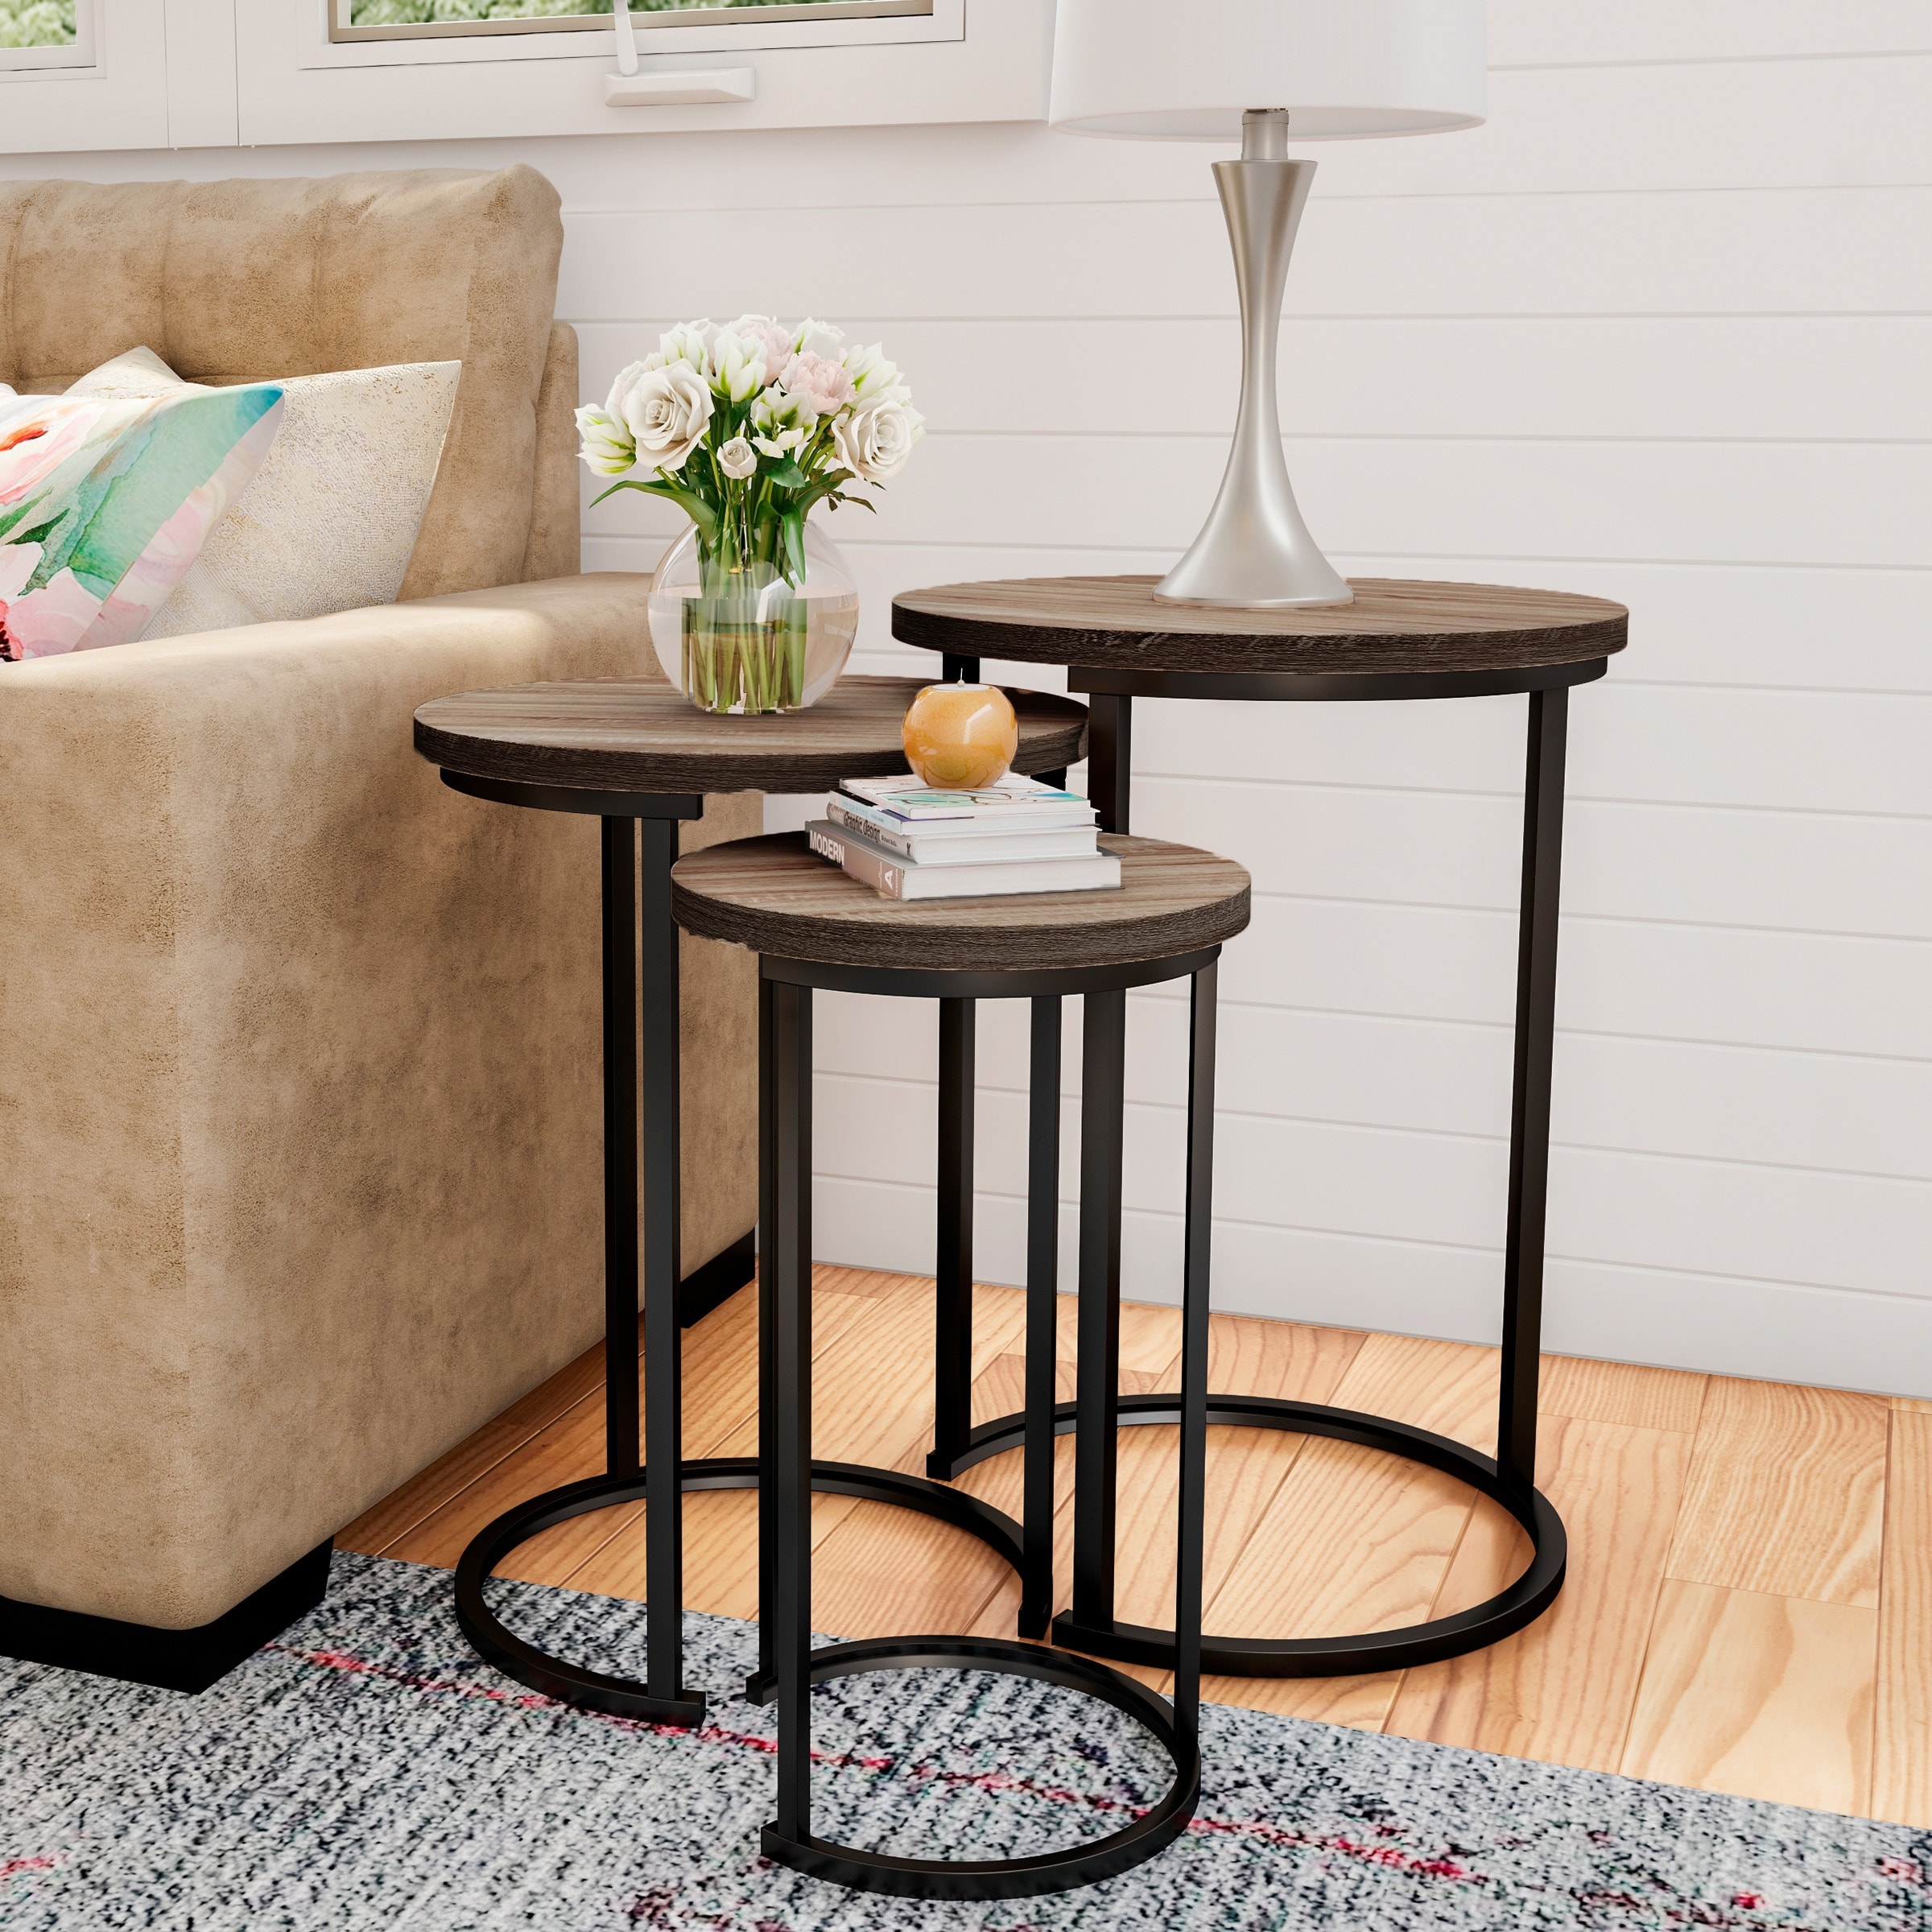 Round Nesting Set of 3 Modern Woodgrain Look with Black Base for Living Room Coffee Tables or Nightstands-Accent Home Furniture